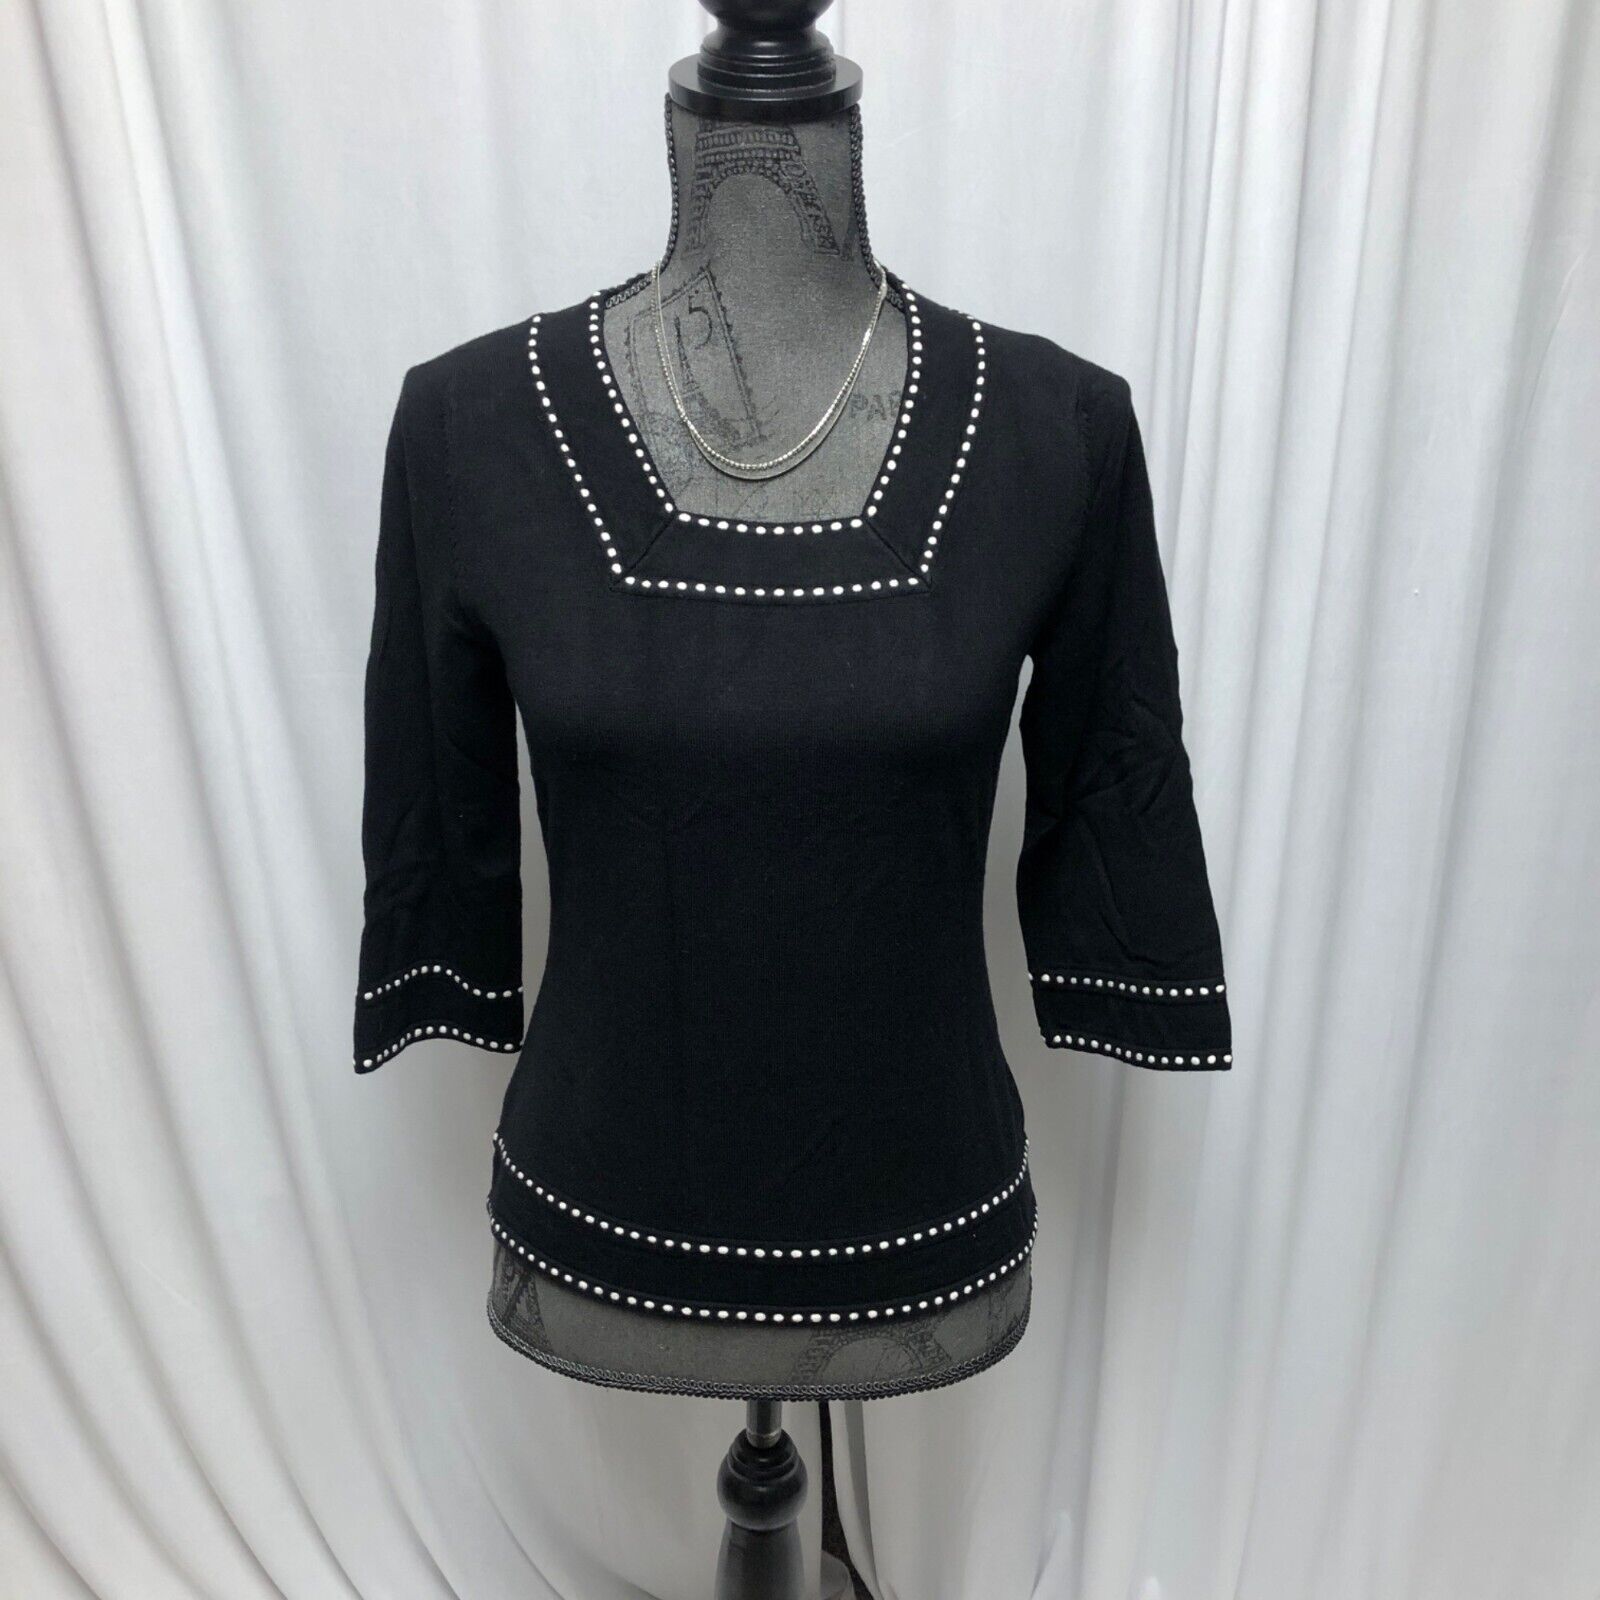 Primary image for Dress Barn Sweater Womens Small Black White Dot Accents Square Neck